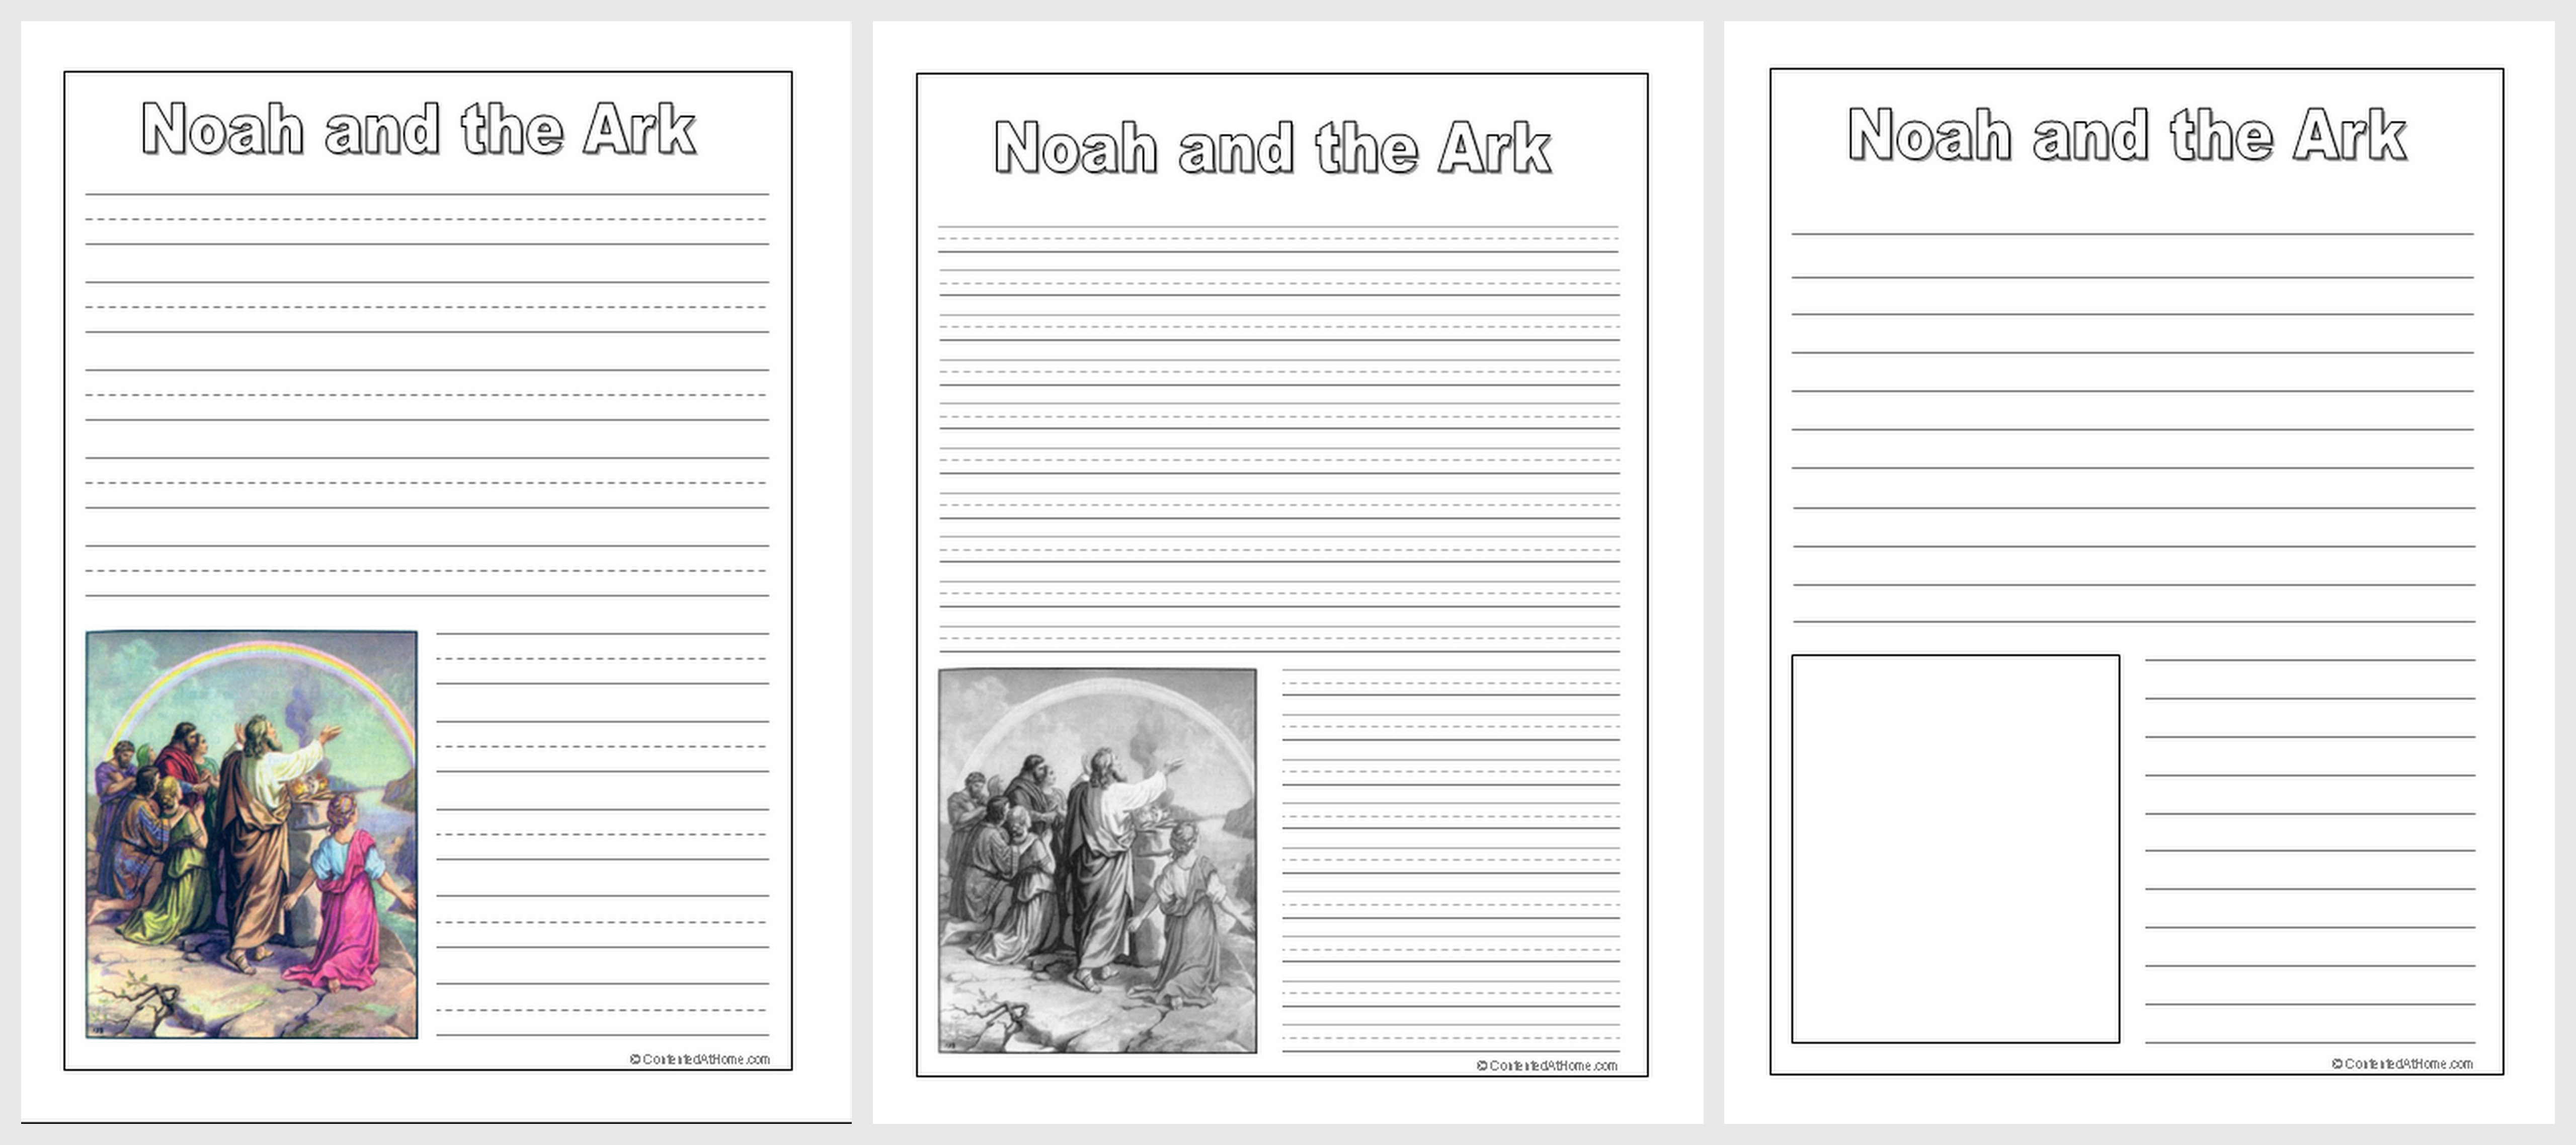 Noah and the Ark Notebooking Pages